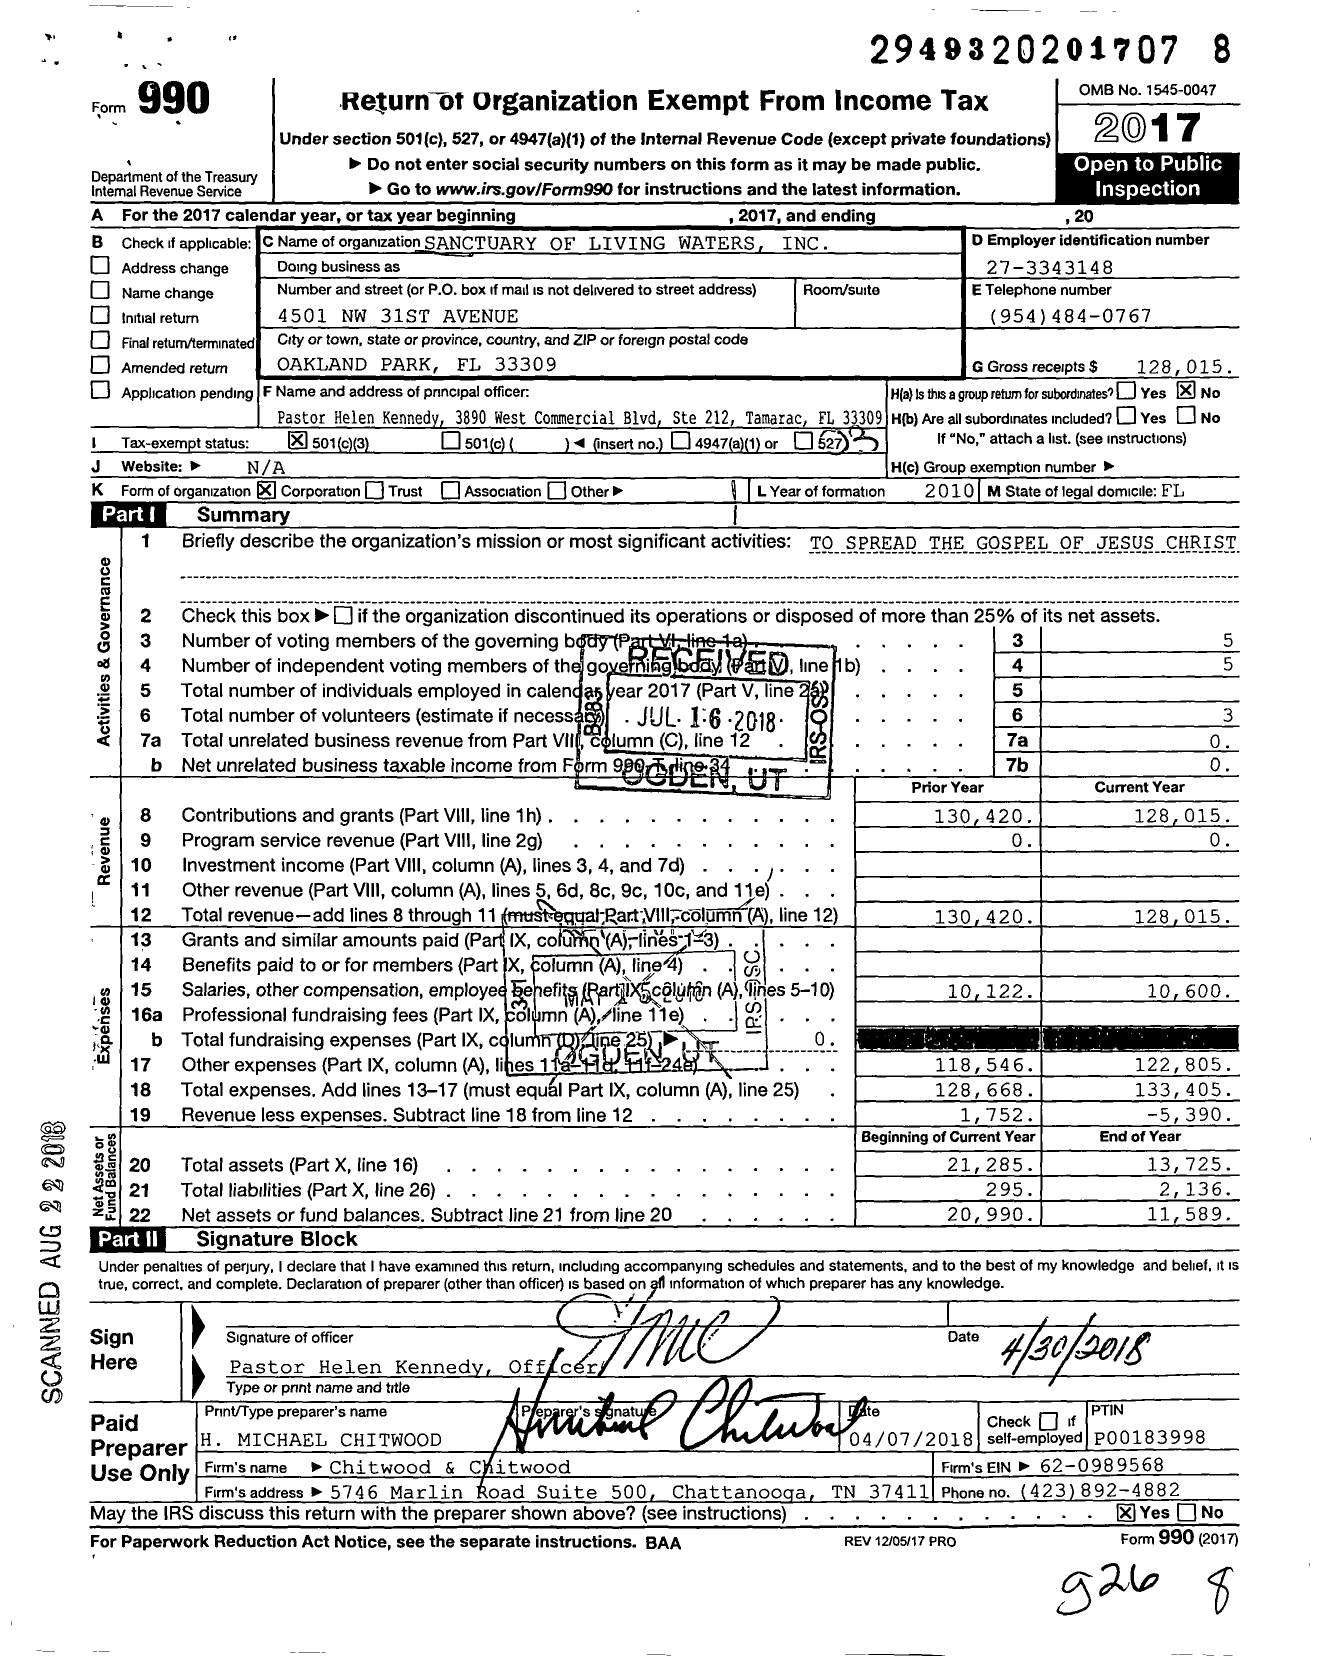 Image of first page of 2017 Form 990 for Sanctuary of Living Waters